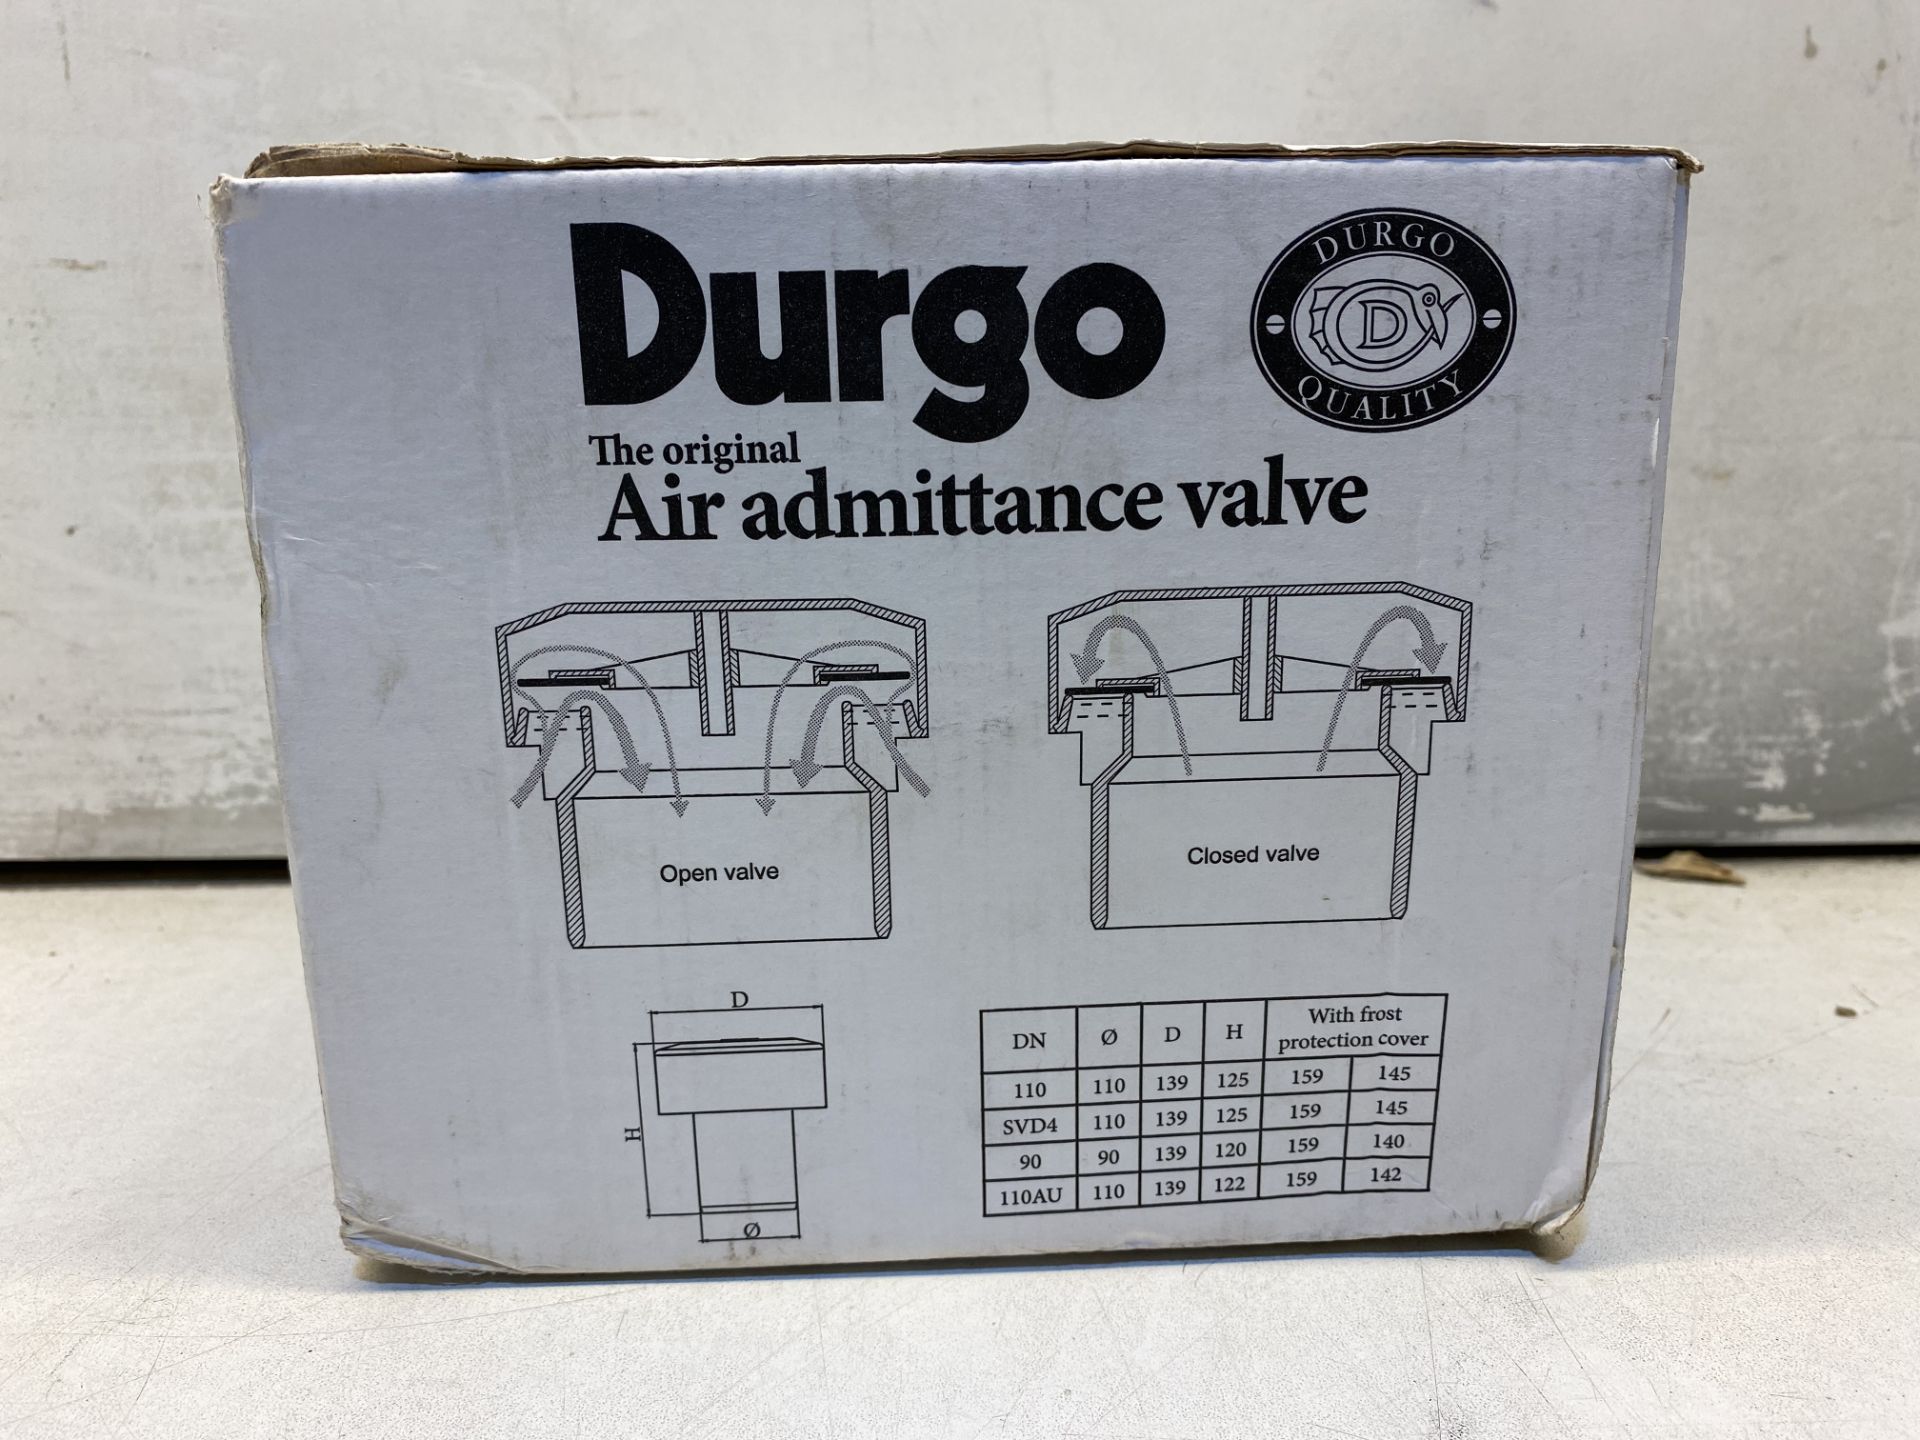 4 x DURGO FITS 4" PIPE AIR ADMITTANCE VALVES - Image 3 of 3